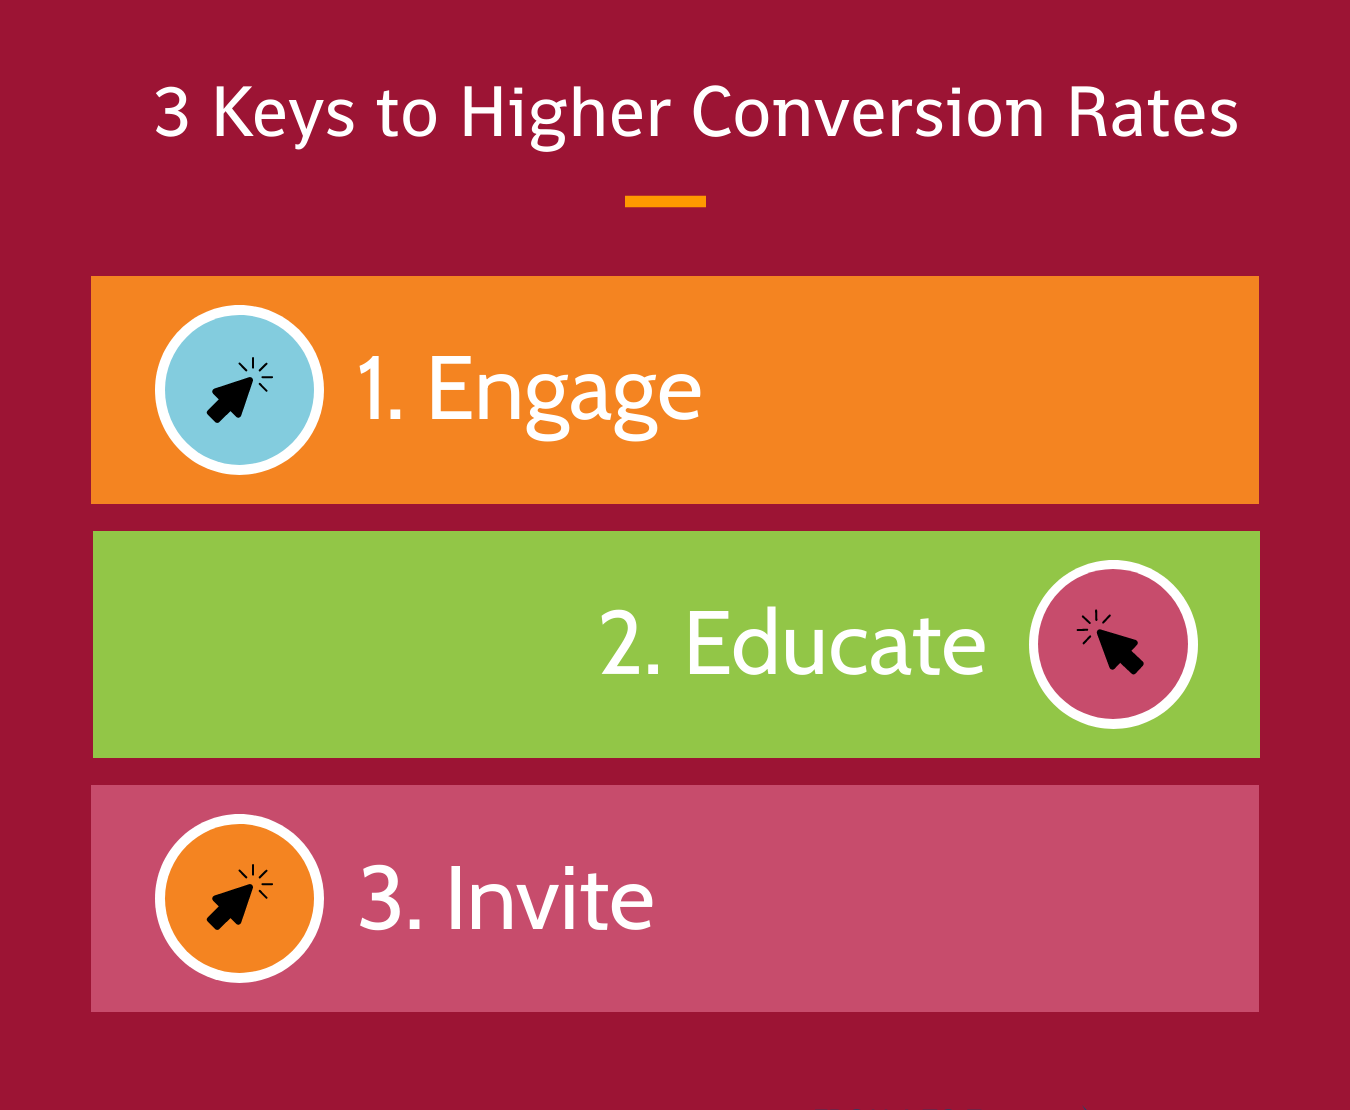 Three keys to higher B2B website conversion rates show are as follows: 1. Engage, 2. Education, and 3. Invite